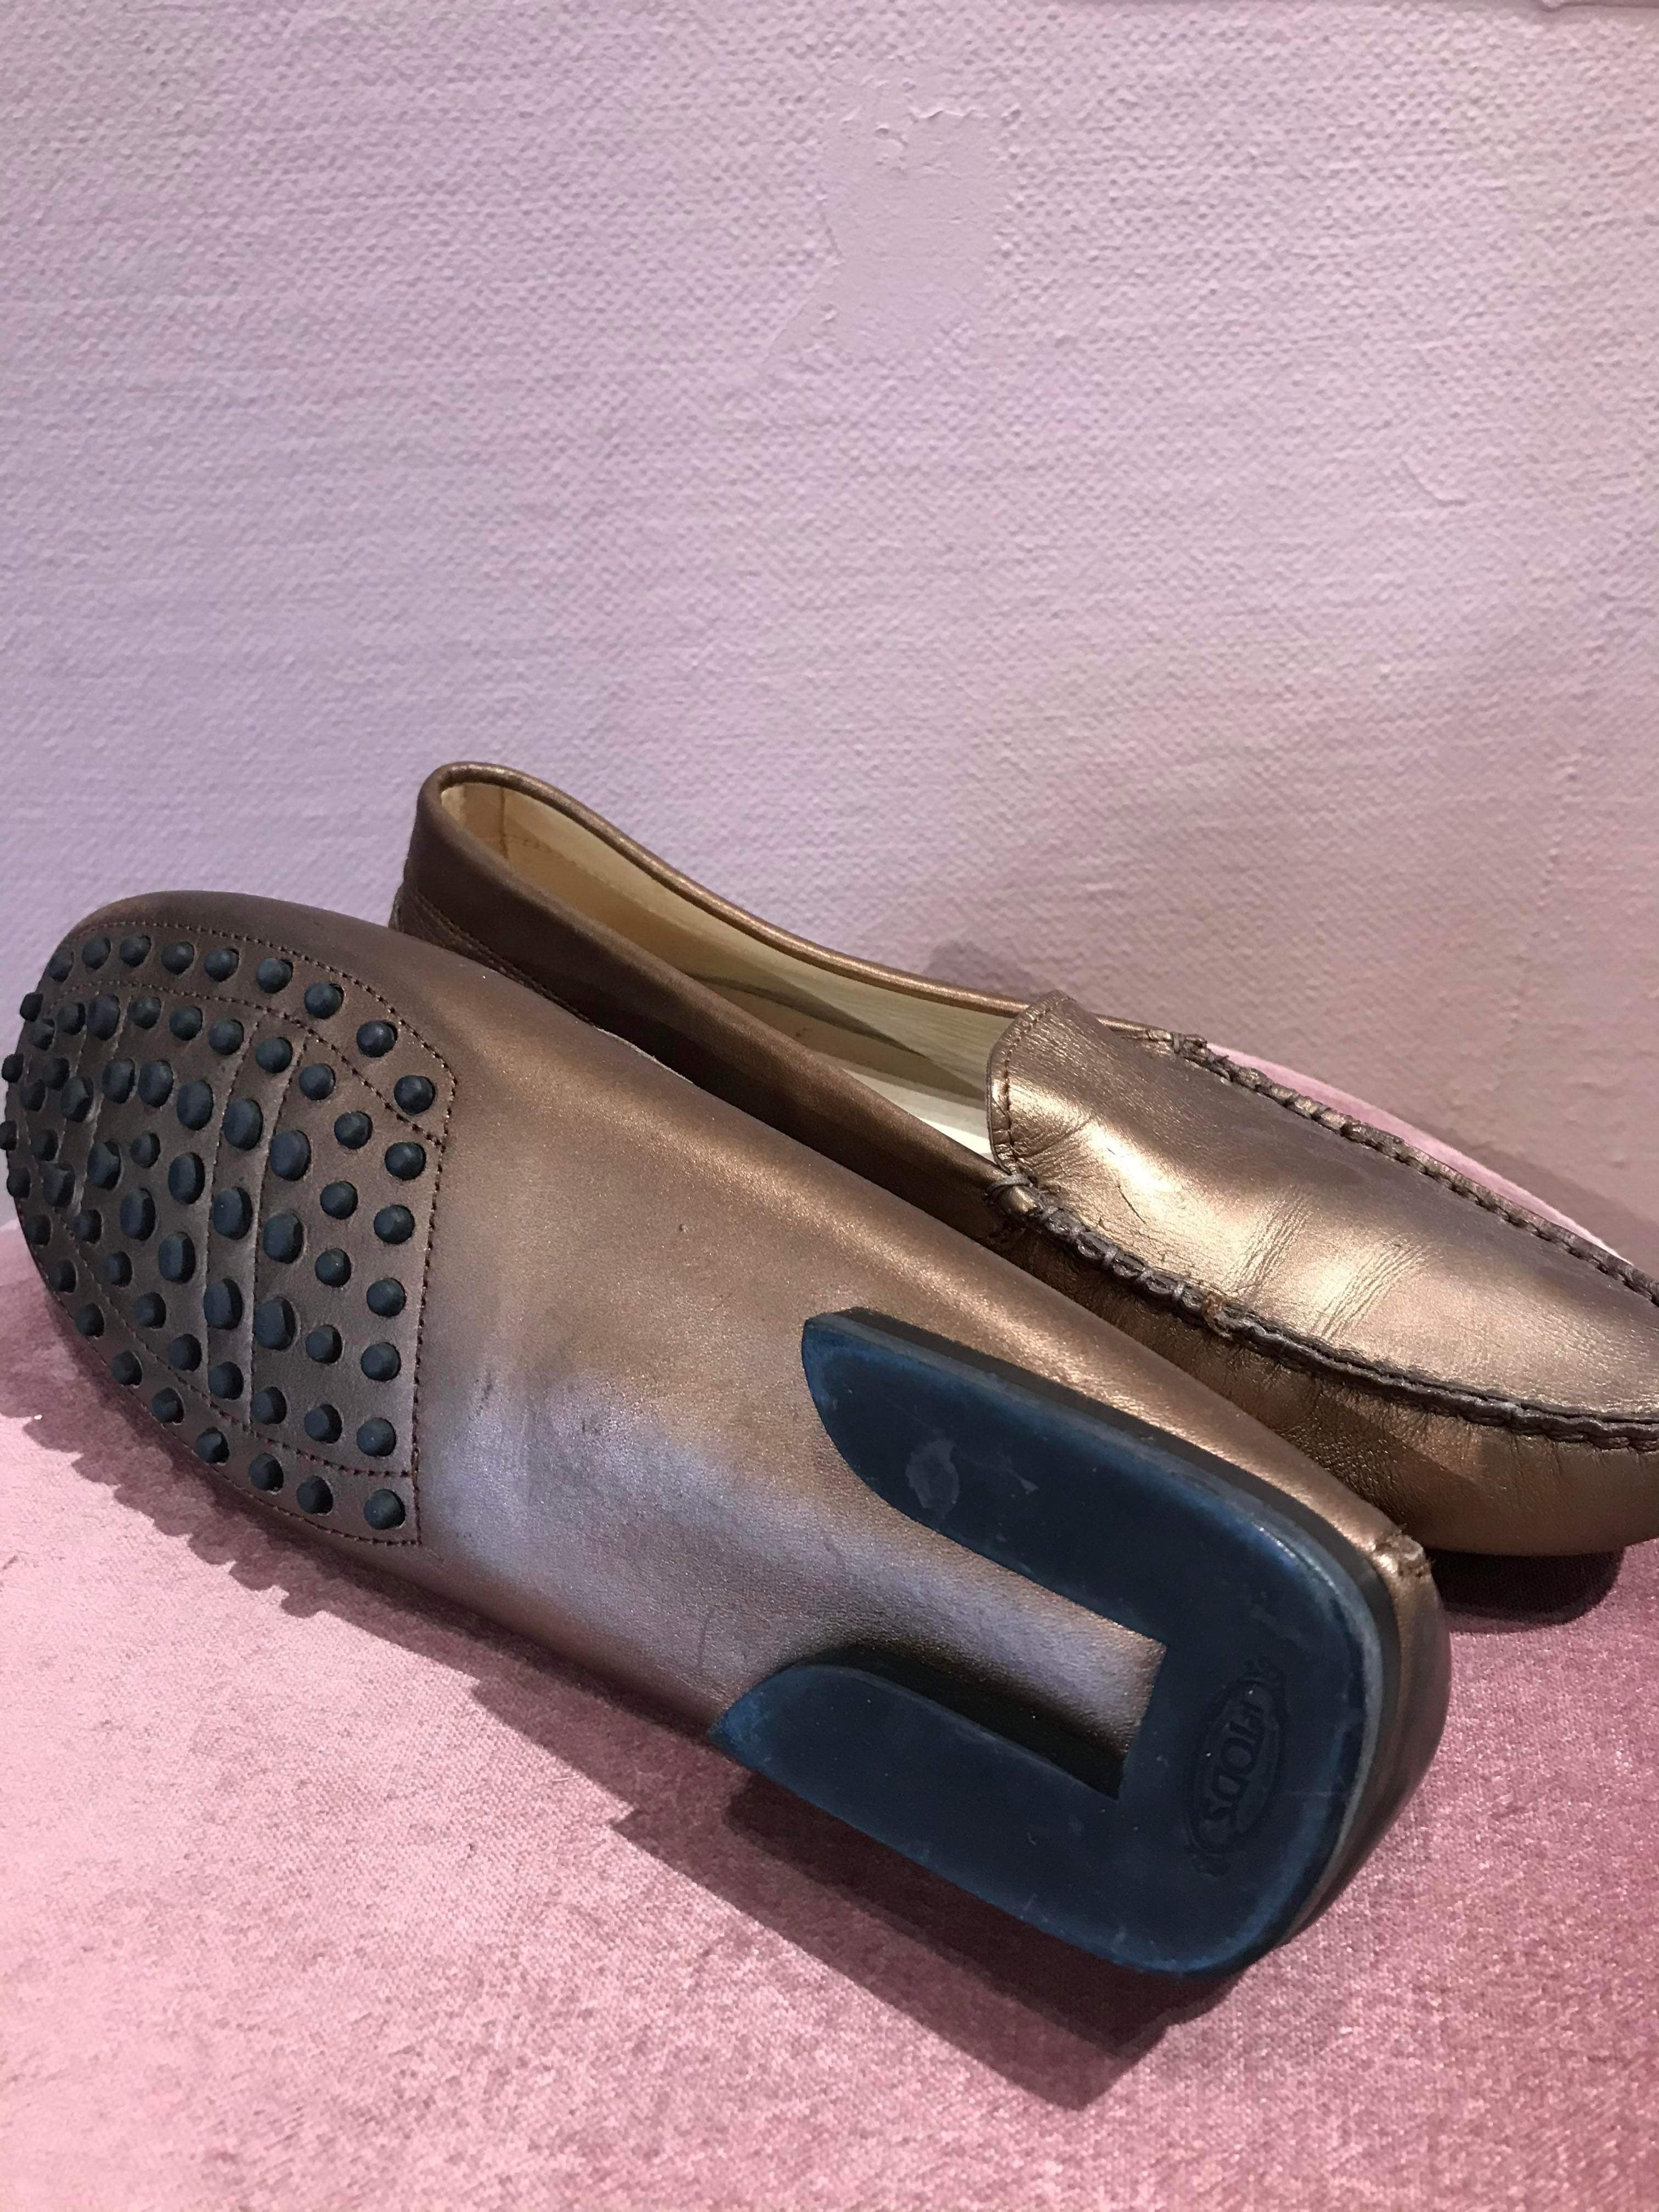 Tod's - loafers